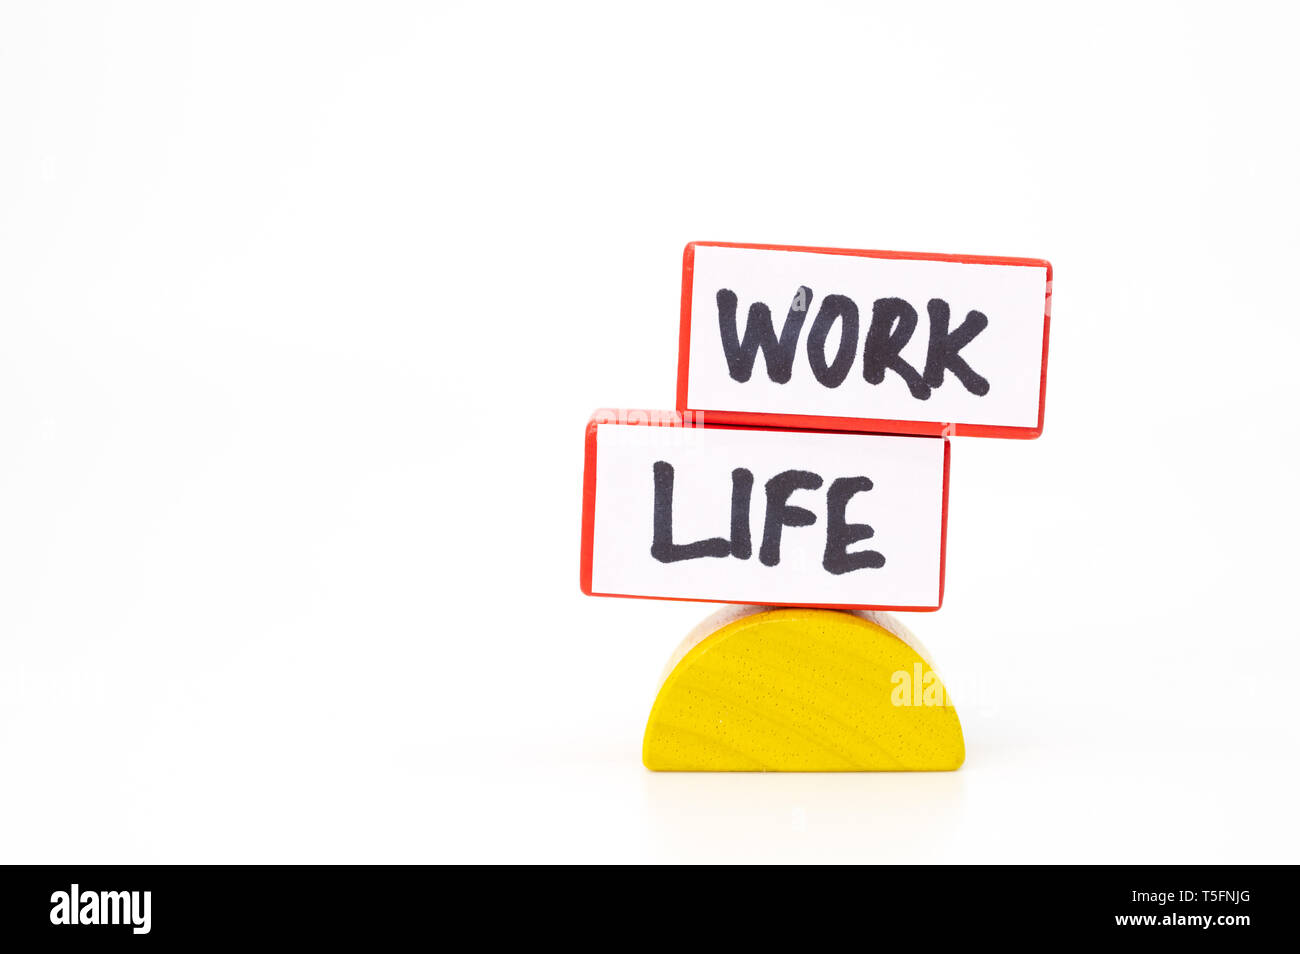 Work life balance concept with two blocks representing work and life Stock Photo